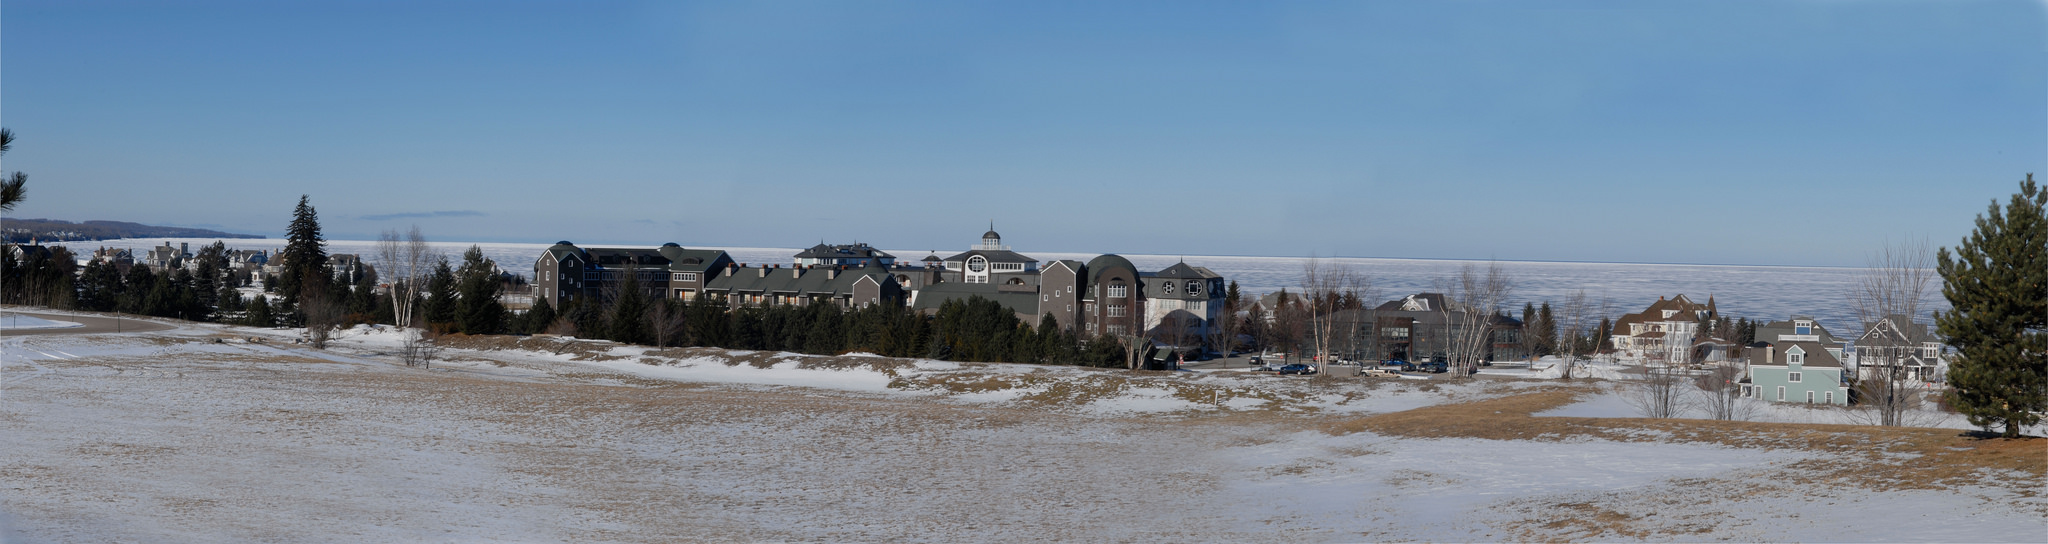 The buildings of Bay Harbor, a luxury mixed-use community, overlook Little Traverse Bay on the site of what was once the Penn-Dixie cement plant. The plant closed in the early ‘80s, and the site was developed years later. (Bridge photo by John Russell)